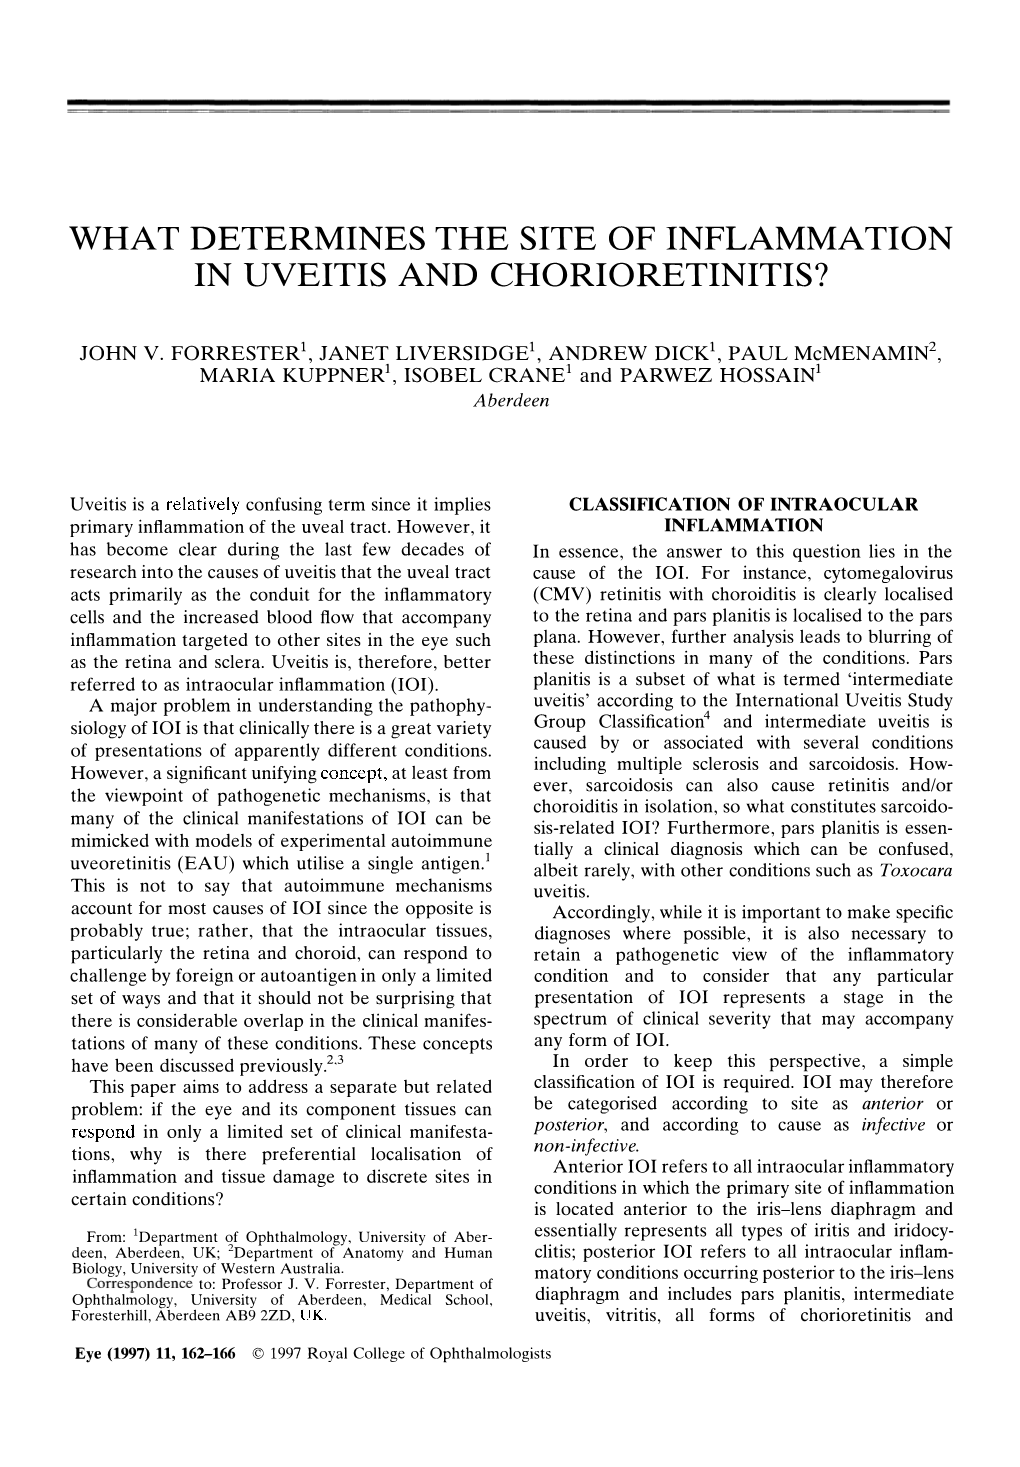 What Determines the Site of Inflammation in Uveitis and Chorioretinitis?